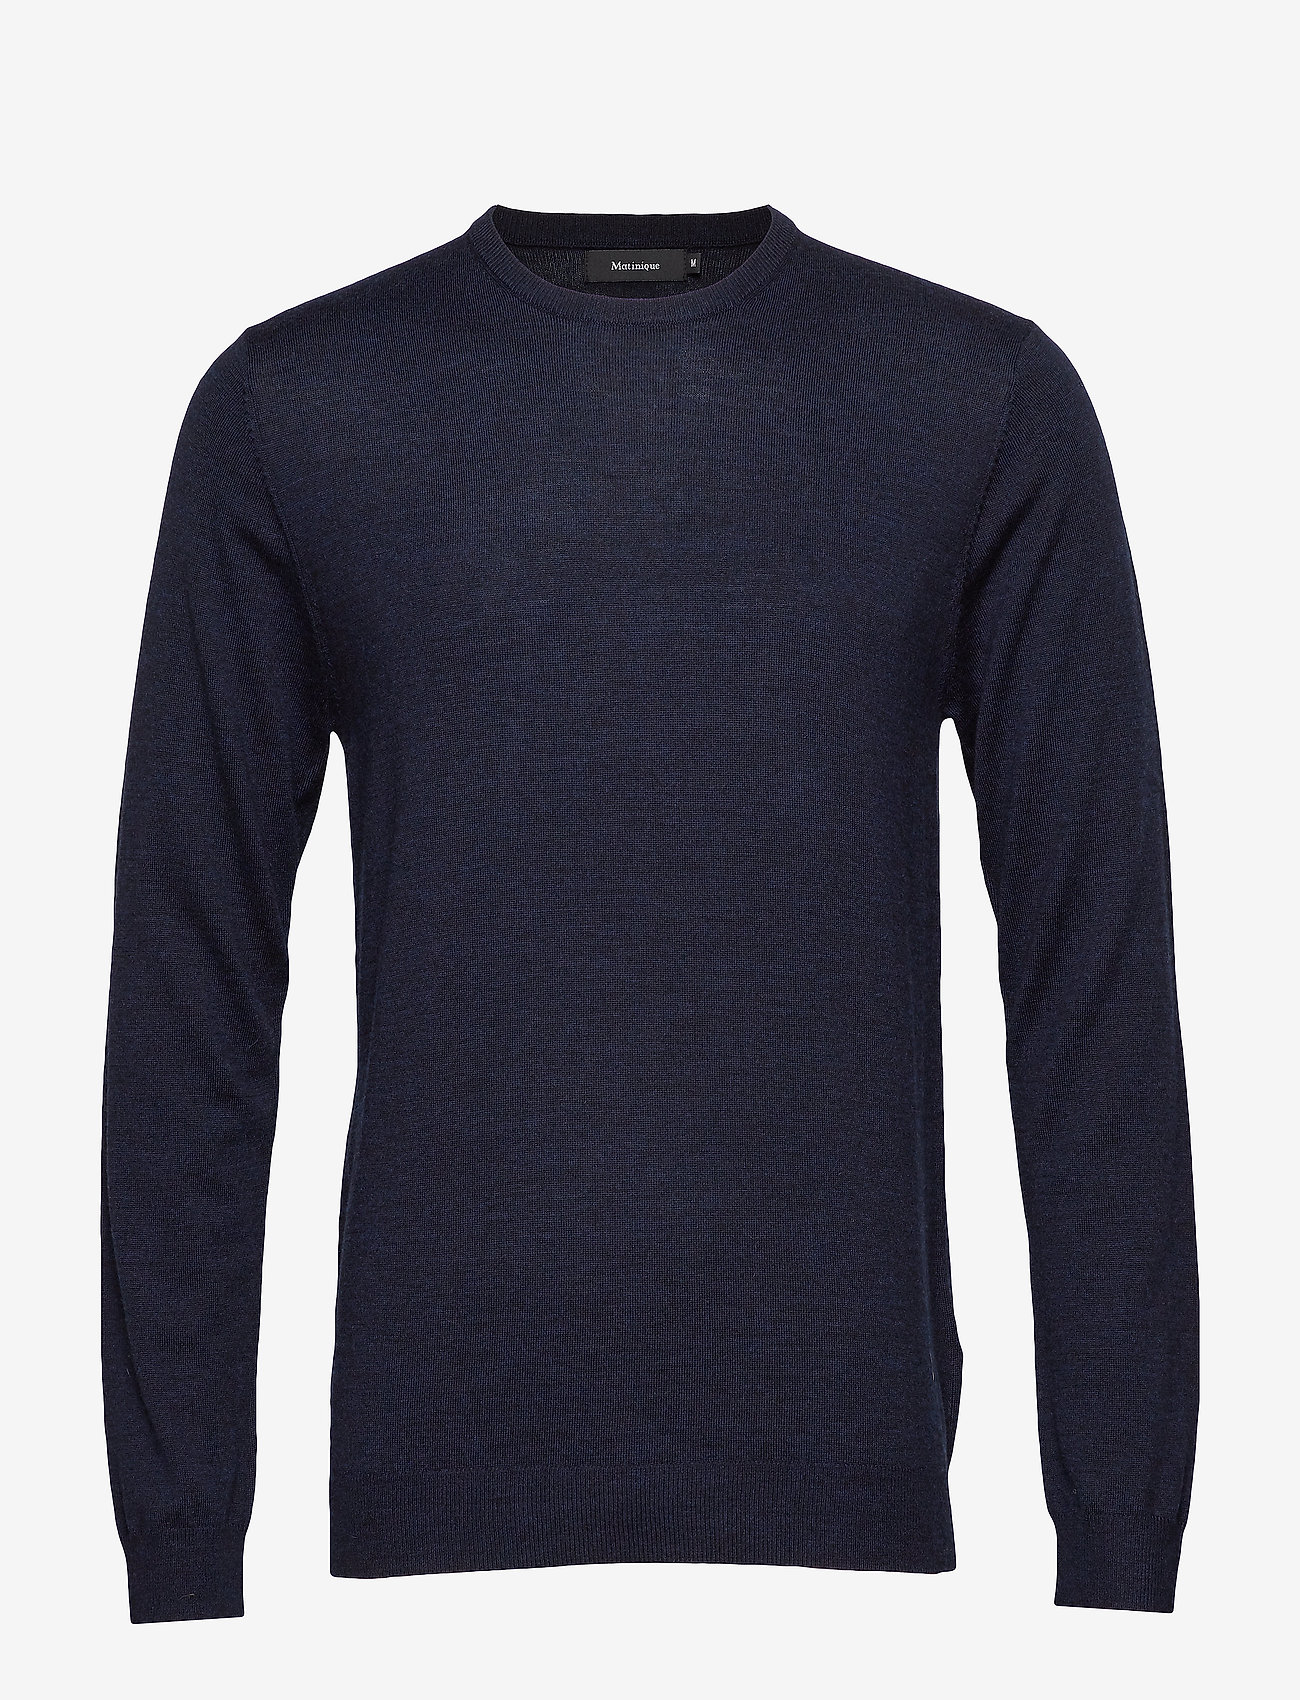 Matinique - Margrate - nordic style - dark navy - 1